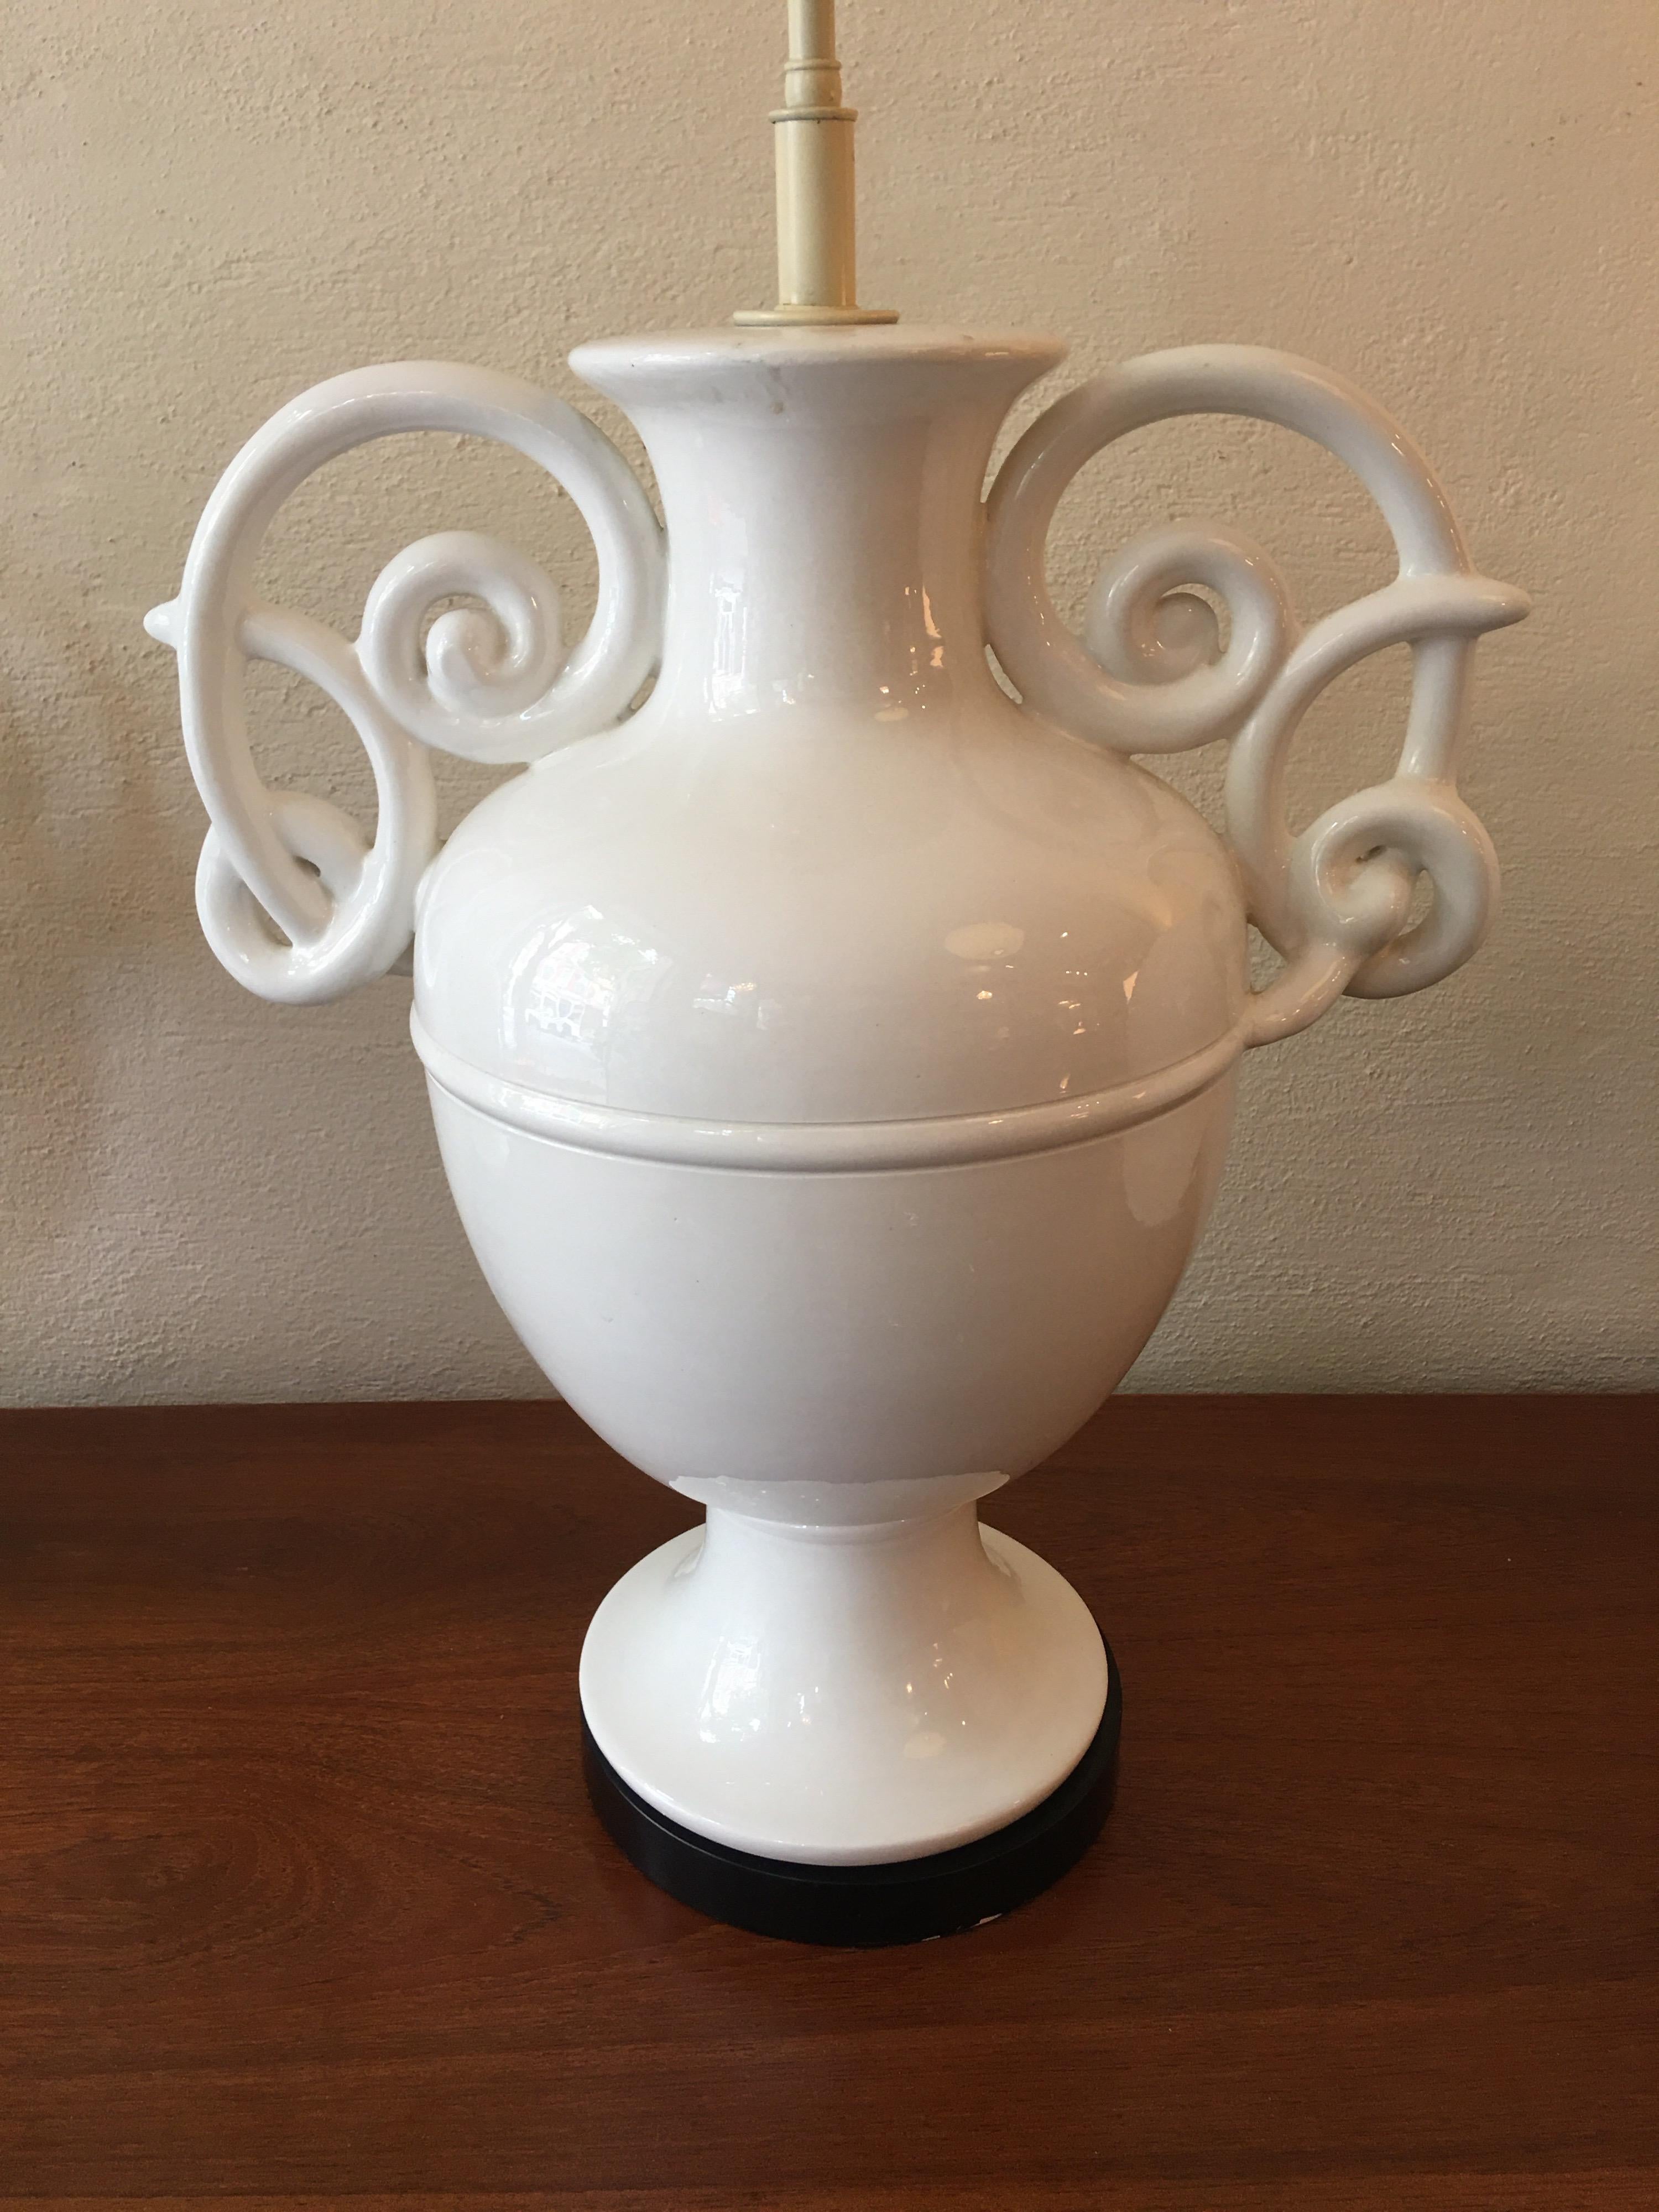 Mid-20th Century Monumental Ceramic Italian Urn Lamps with Curly Handles/  Style of Giacometti